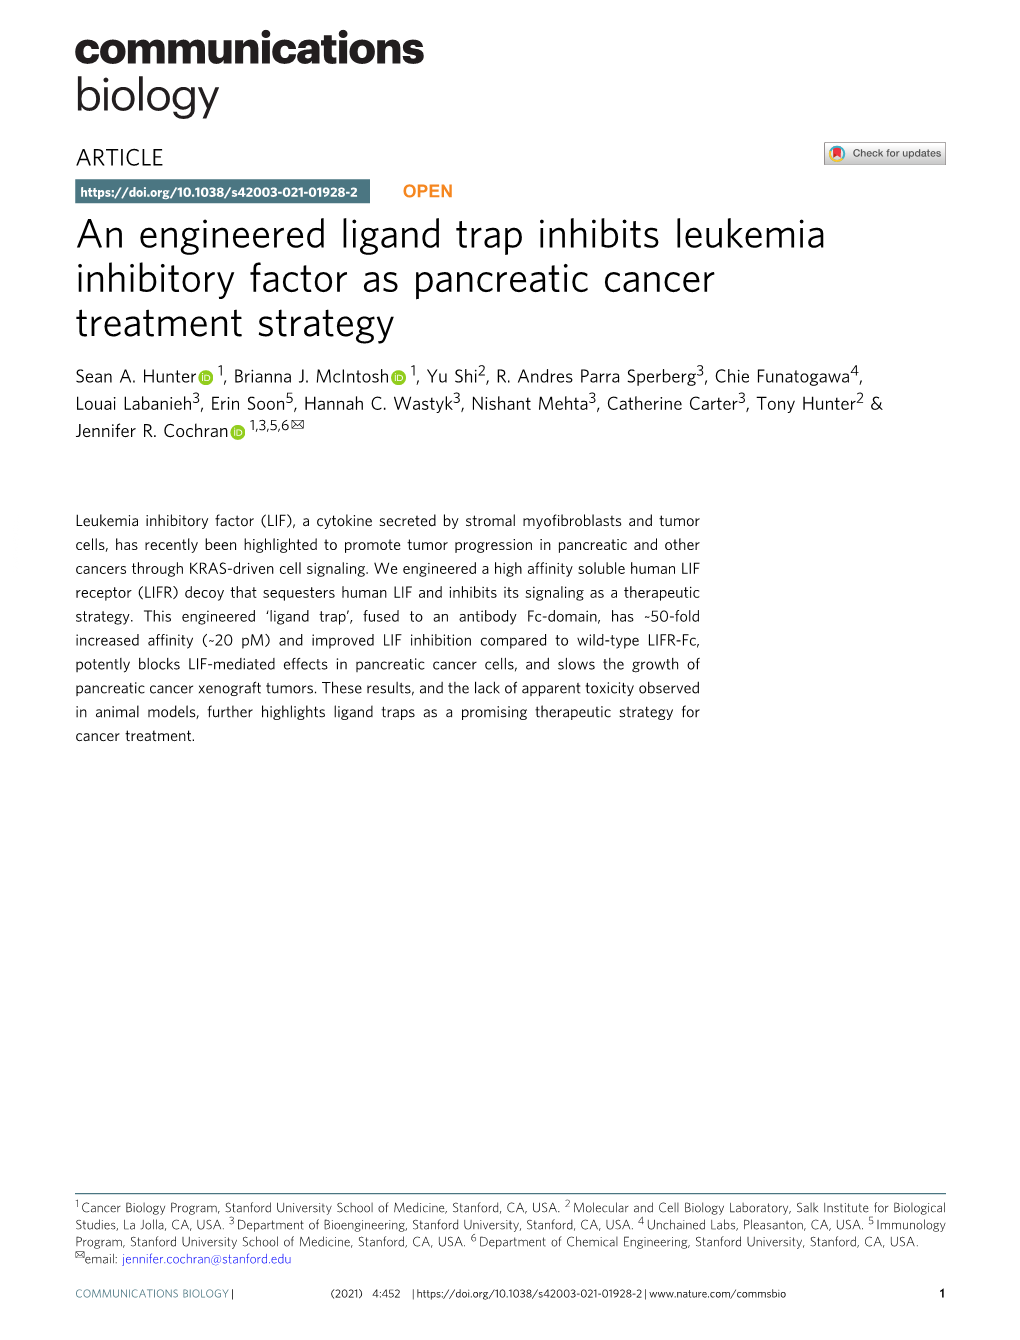 An Engineered Ligand Trap Inhibits Leukemia Inhibitory Factor As Pancreatic Cancer Treatment Strategy